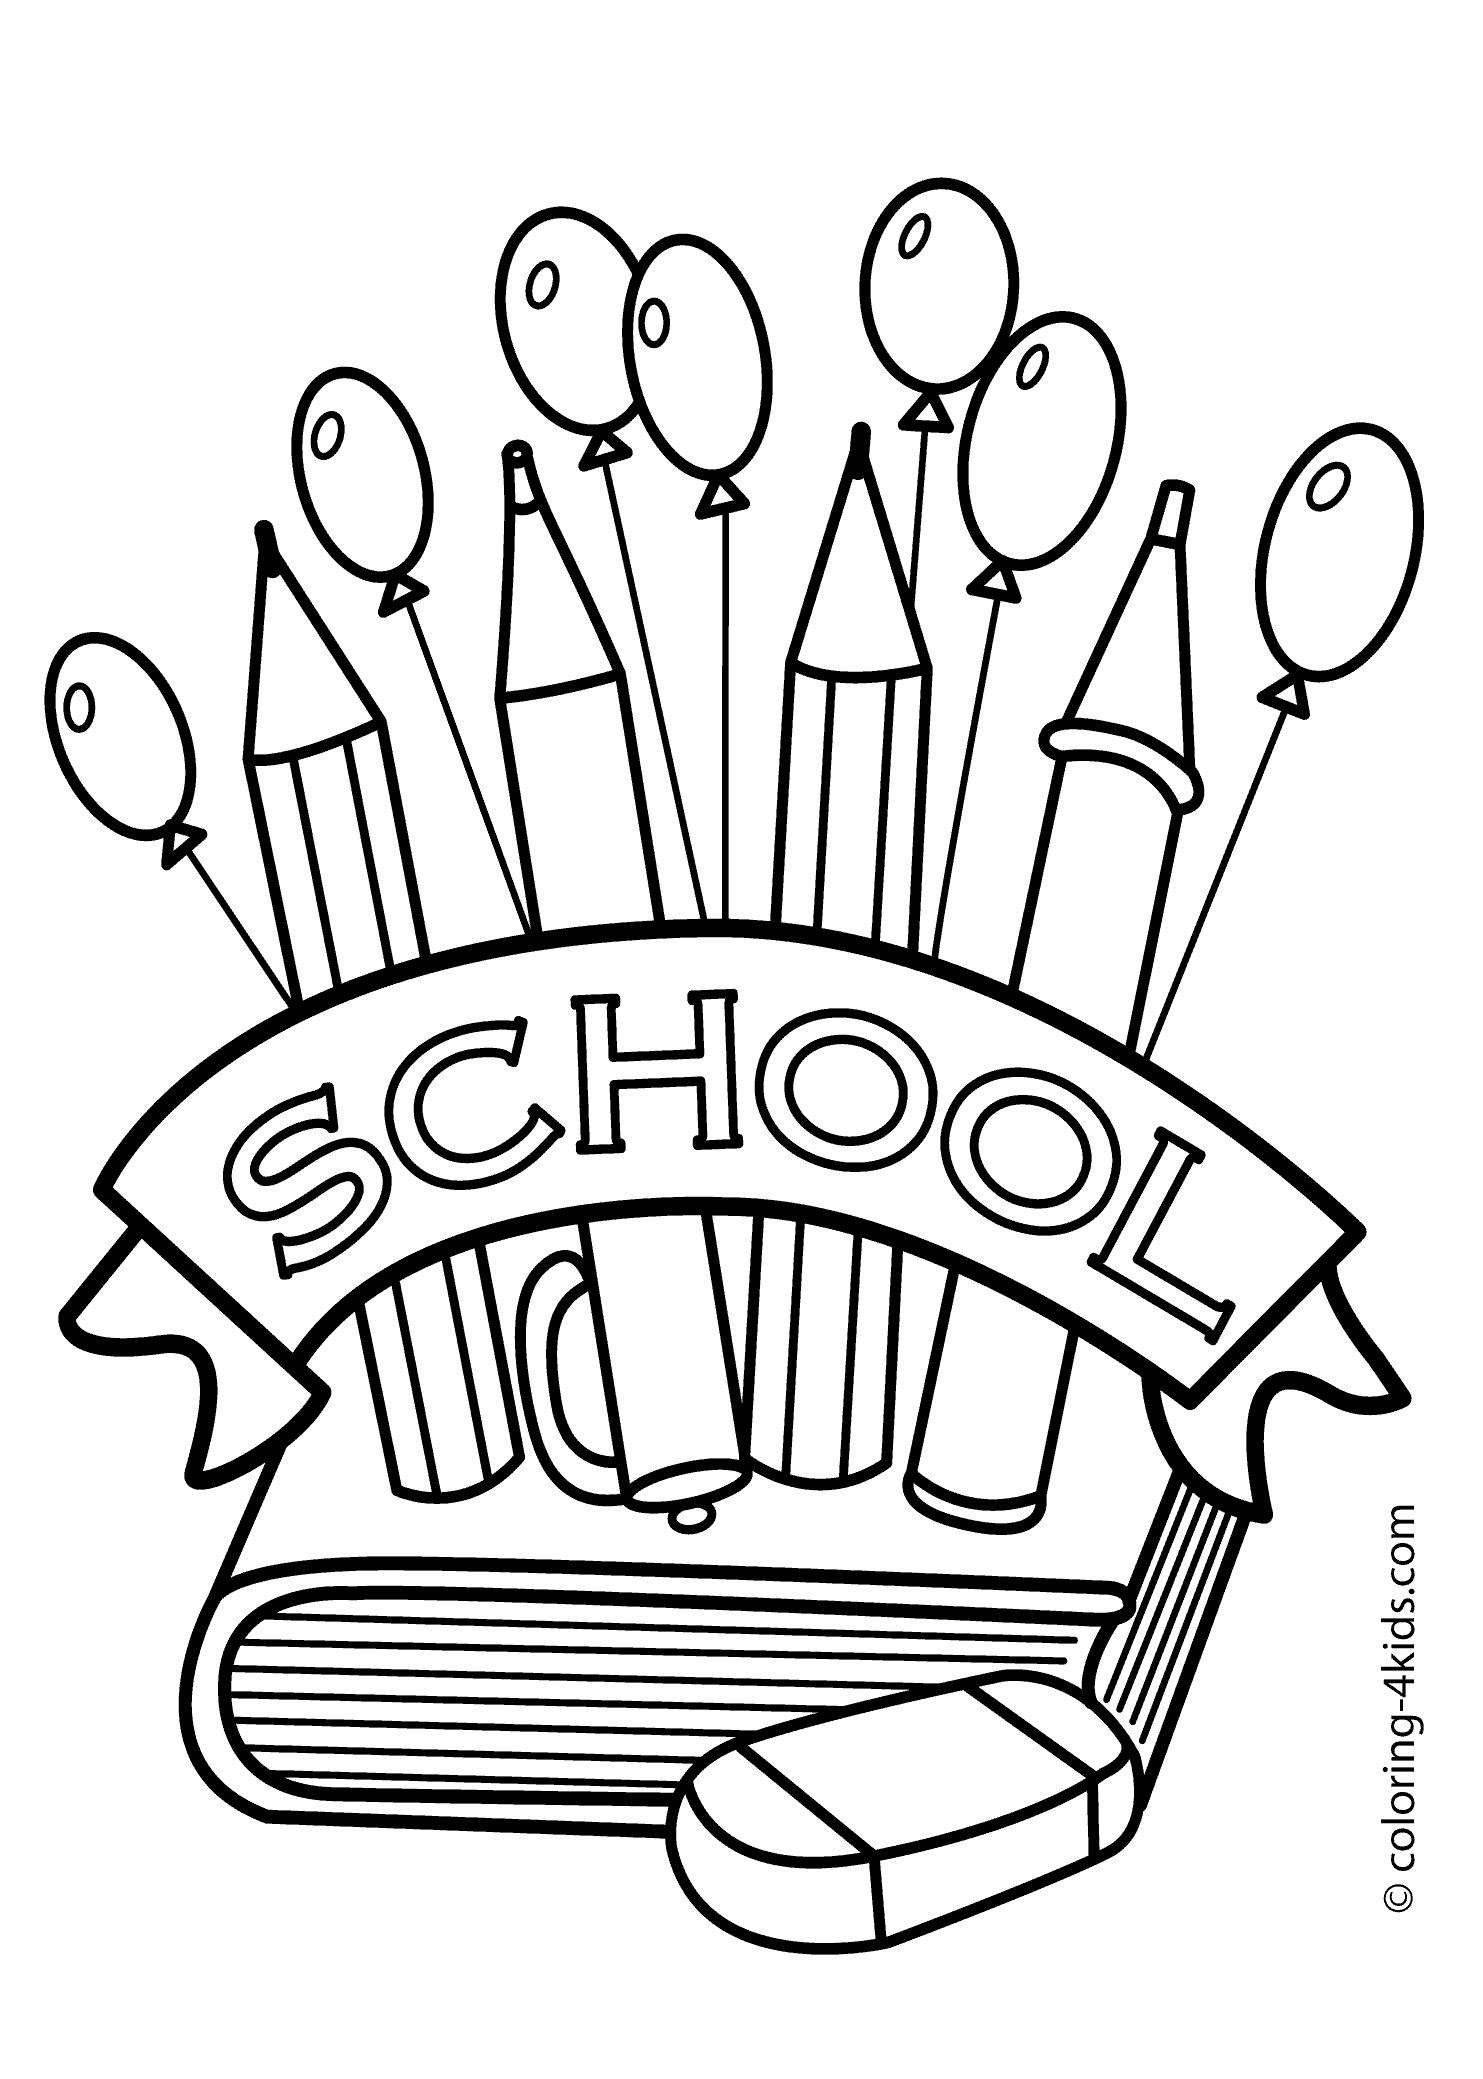 College Coloring Pages
 Back to the School coloring page classes coloring page